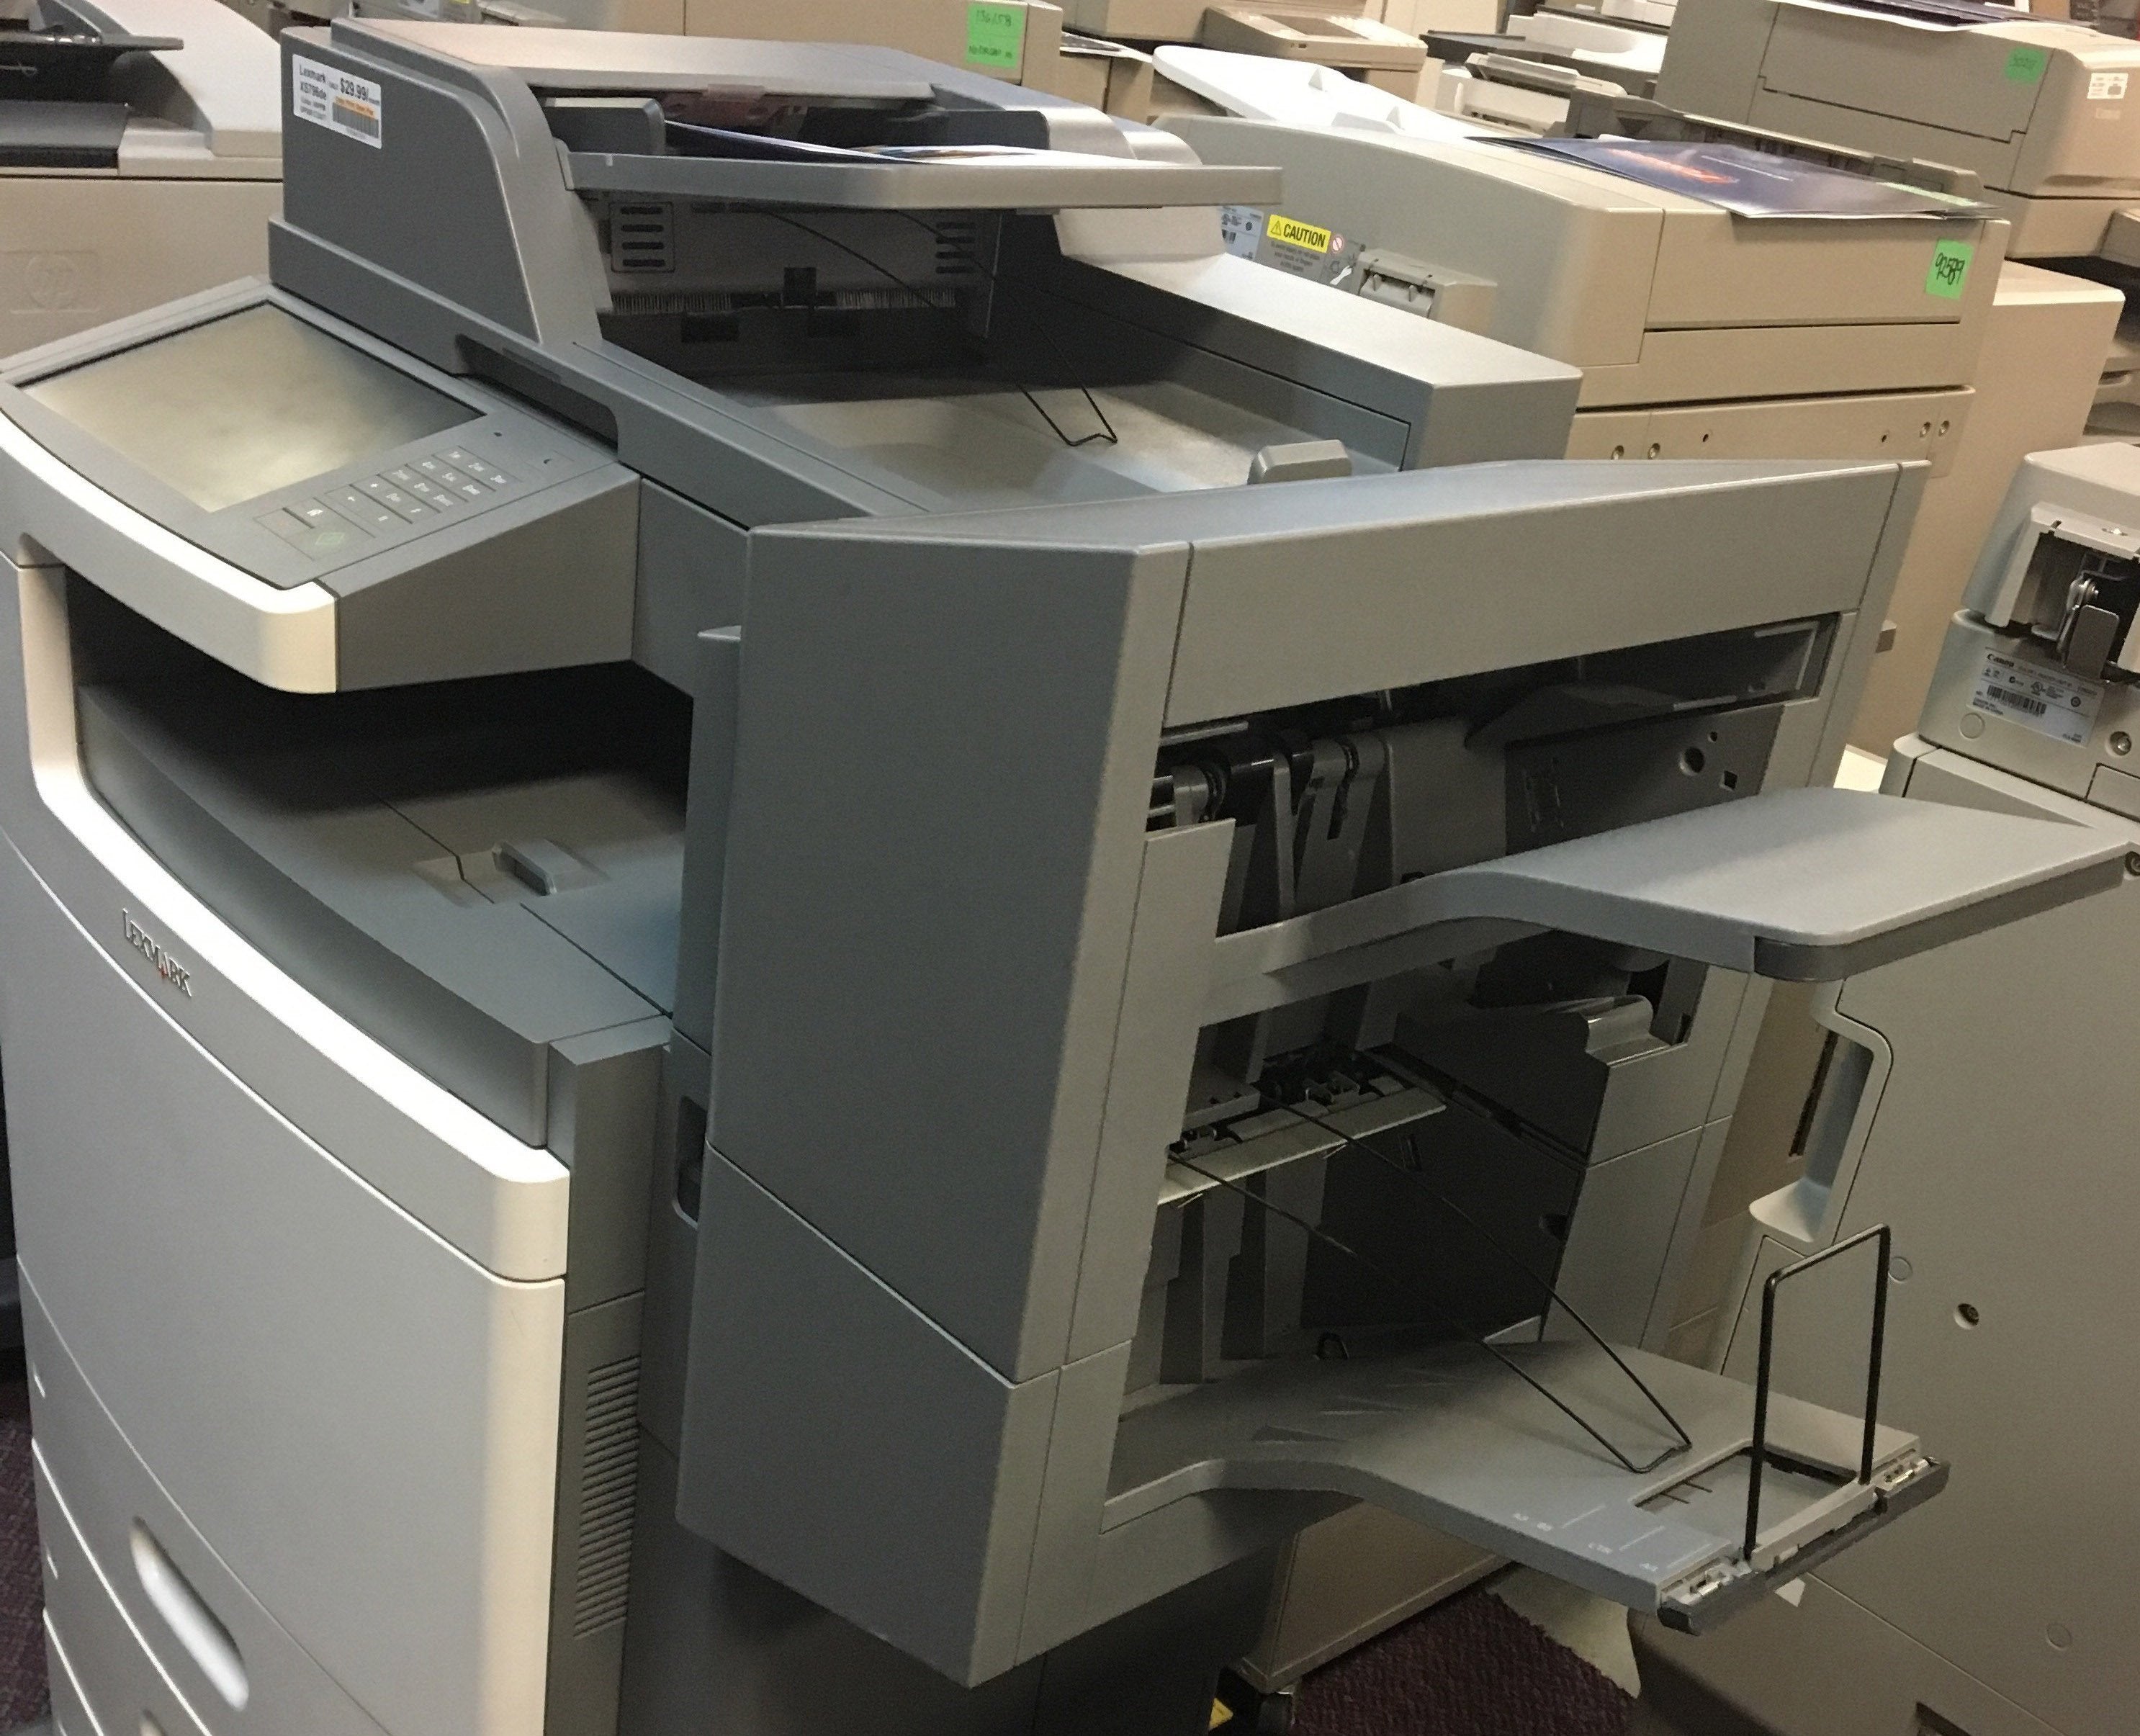 Absolute Toner REPOSSESSED Lexmark XS796de Multifunction Color Copier Printer Scanner Fax Finisher Large Colur LCD panel Office Copiers In Warehouse